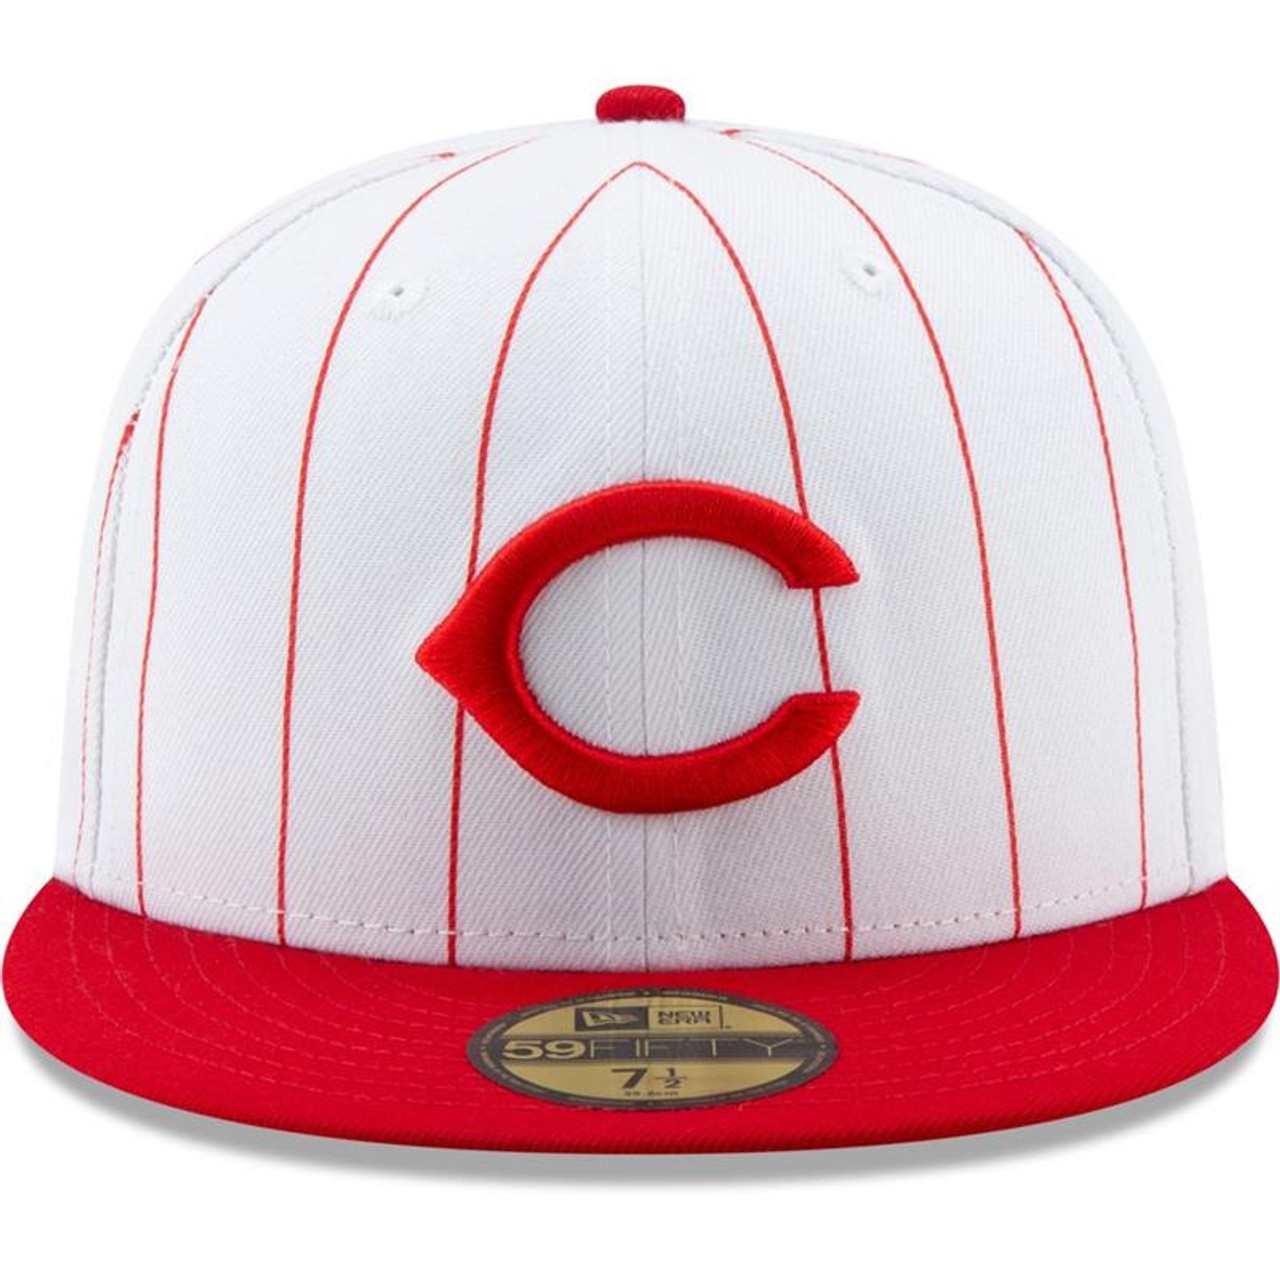 New Era Cincinnati Reds 150th Anniversary Pinstripe Heroes Elite Edition  59Fifty Fitted Hat, EXCLUSIVE HATS, CAPS